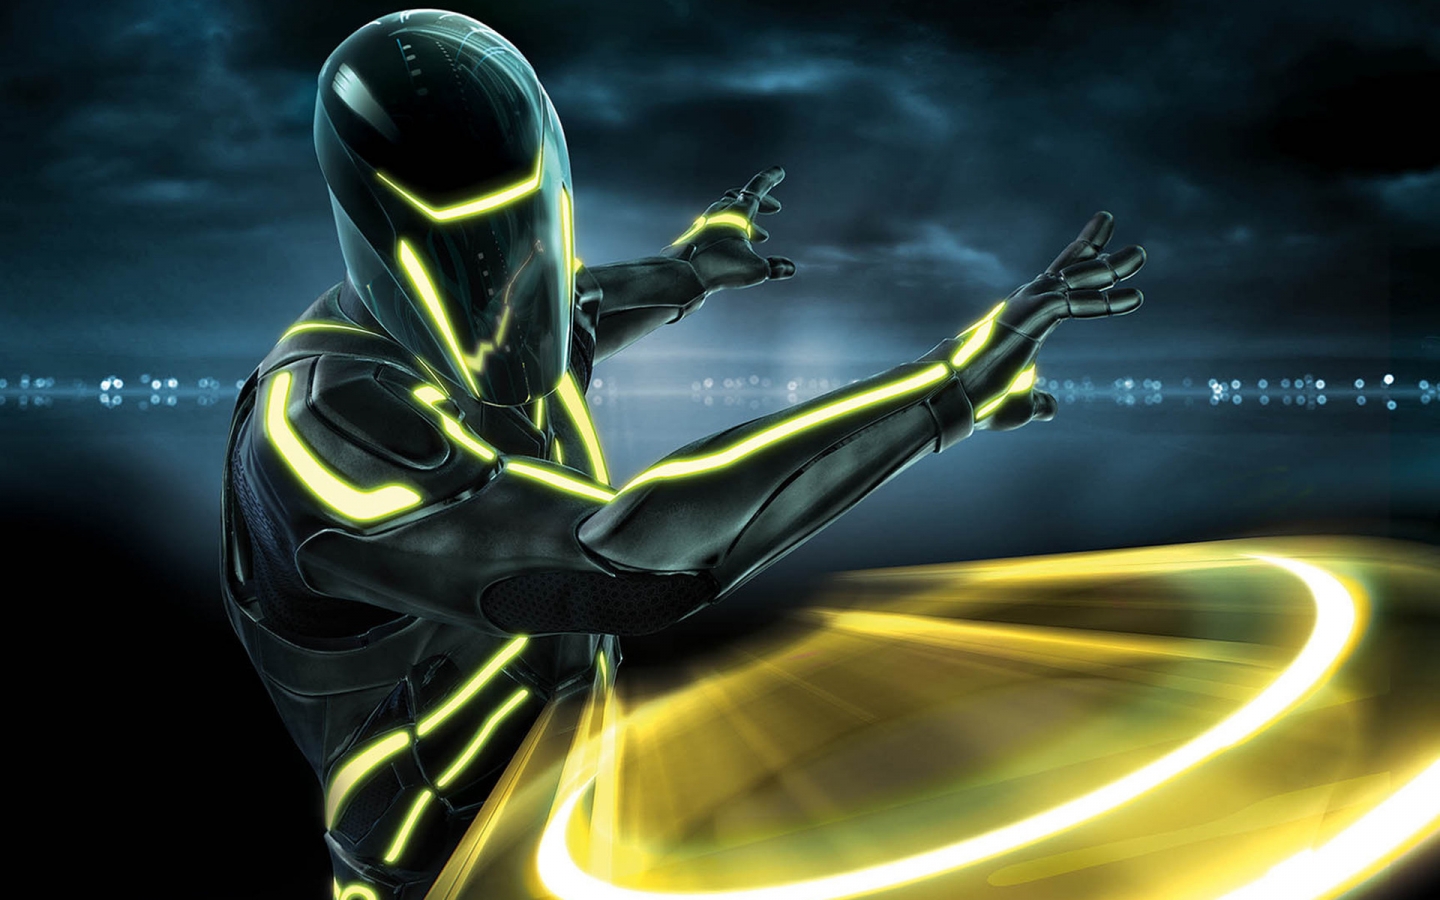 Tron Legacy Clu for 1440 x 900 widescreen resolution